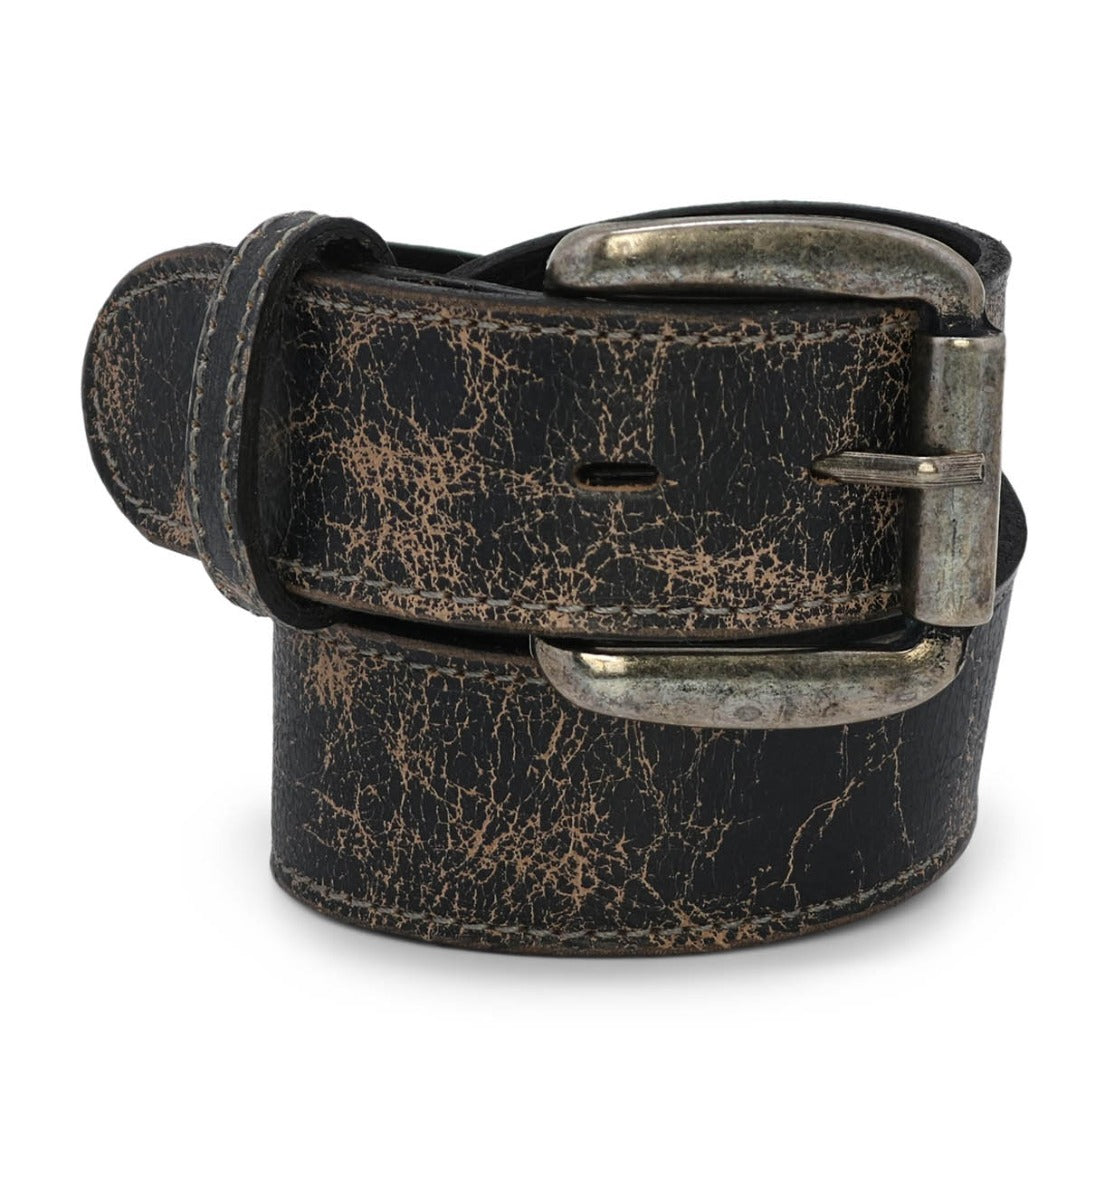 A distressed Meander Black Lux Belt with a scratched metallic buckle, rolled up, isolated on a white background. (Bed Stu)